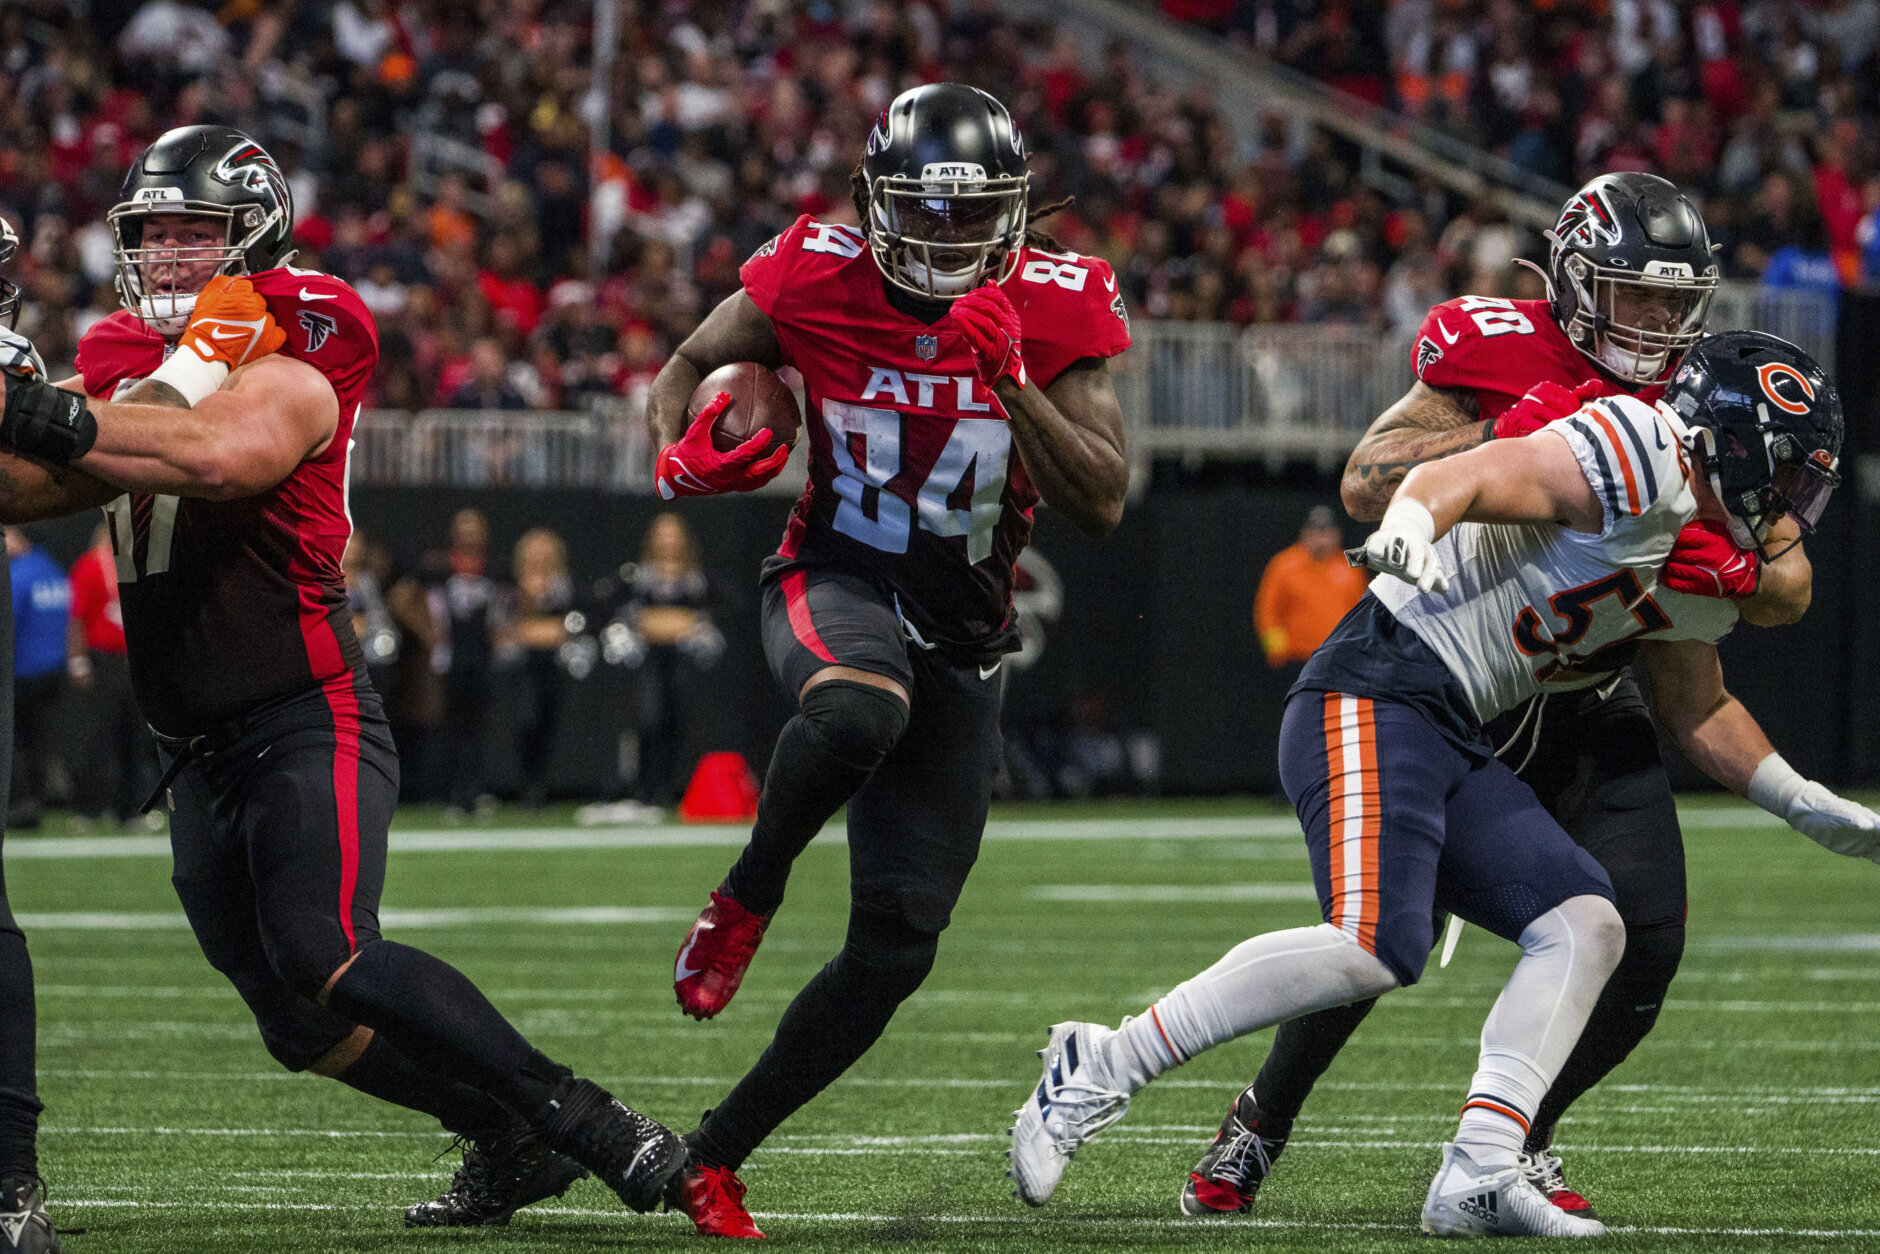 <p><em><strong>Bears 24</strong></em><br />
<em><strong>Falcons 27</strong></em></p>
<p>It was somewhat fitting that Cordarrelle Patterson broke the record for most career kickoff return touchdowns (9) against one of his former teams in a game in which his current team needed it desperately. He&#8217;s definitely the biggest X-factor for this Jekyll and Hyde Atlanta squad coming to FedEx Field.</p>
